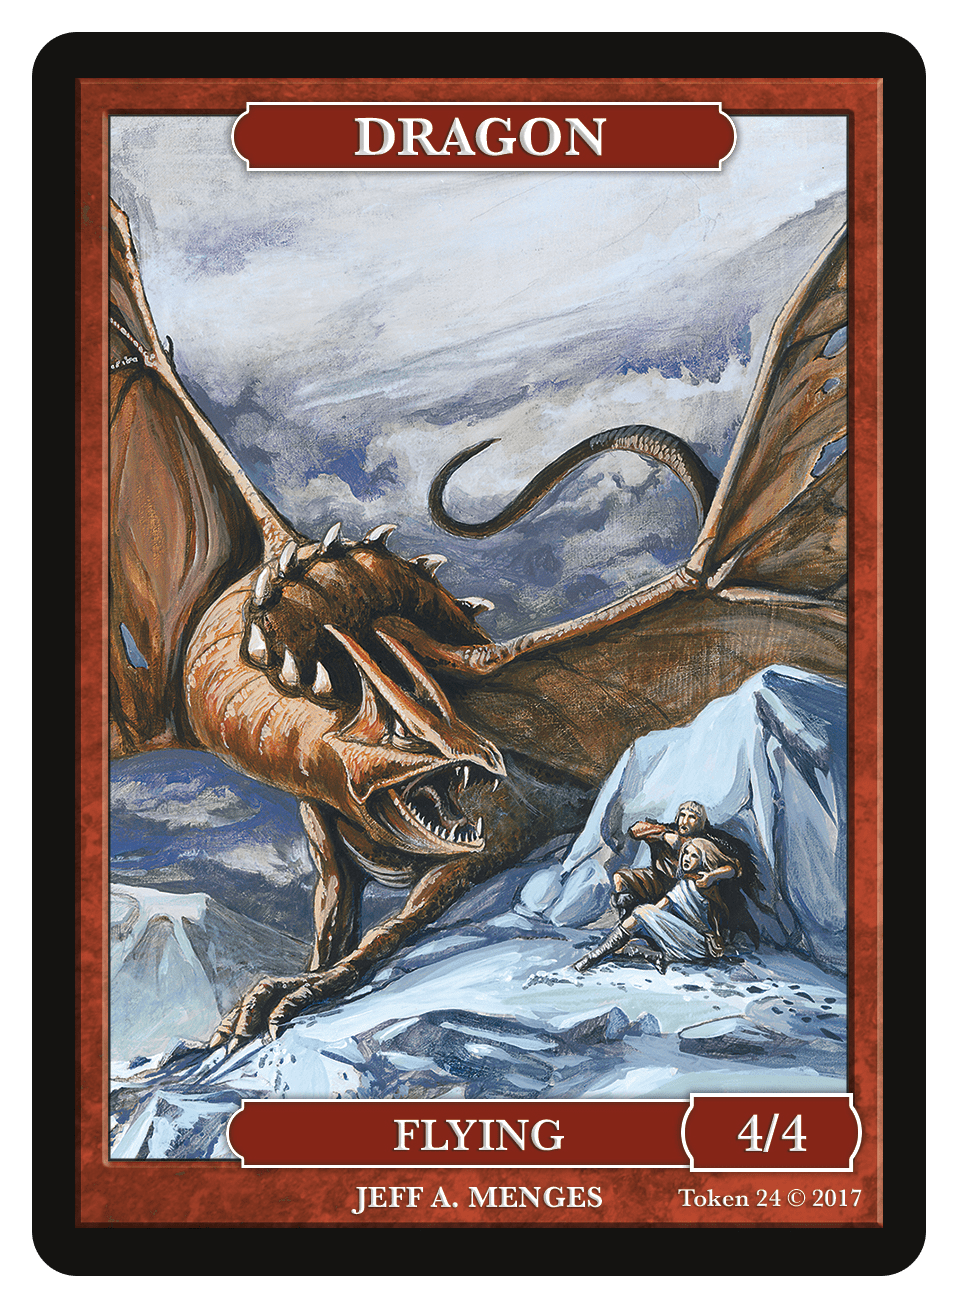 Dragon Token (4/4) by Jeff A. Menges - Token - Original Magic Art - Accessories for Magic the Gathering and other card games